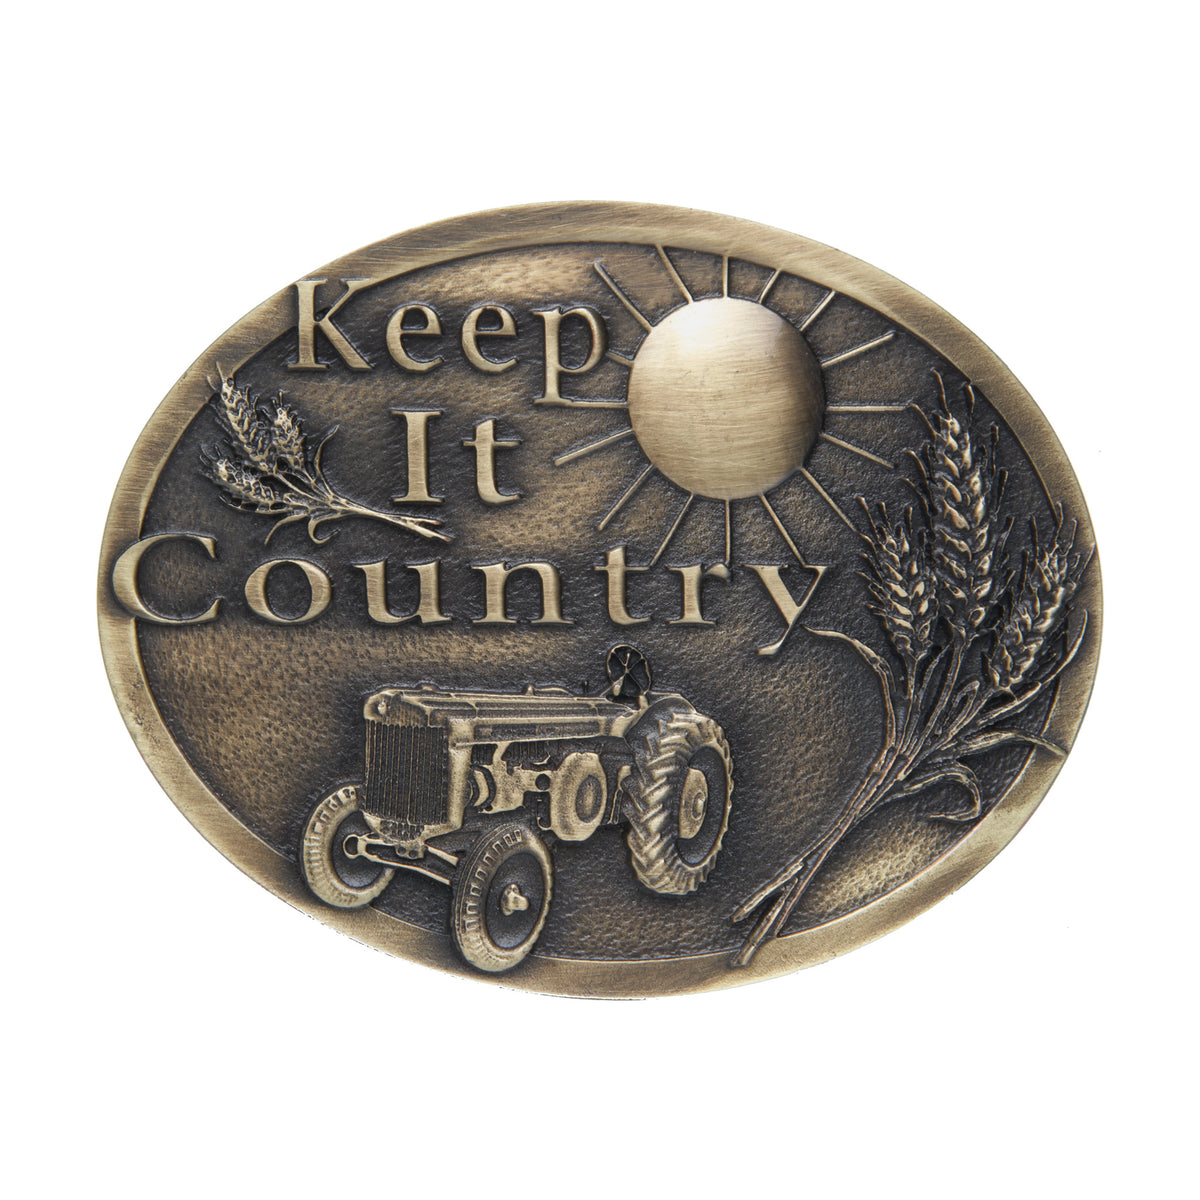 Keep It Country Buckle